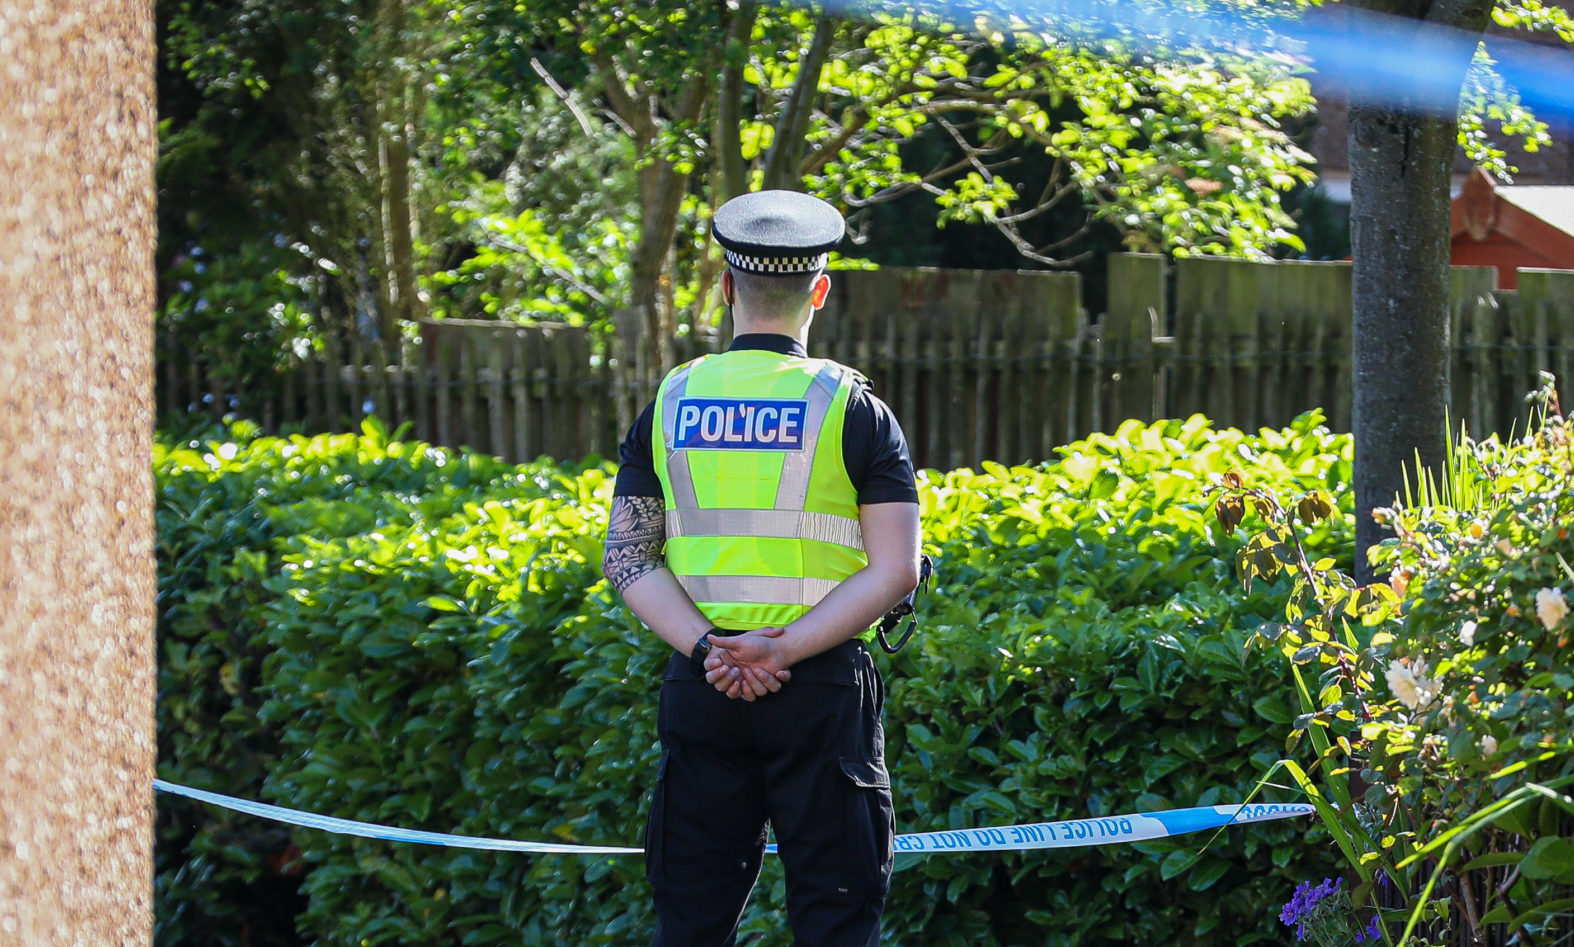 Police stand guard following the incident in Glenrothes last week.